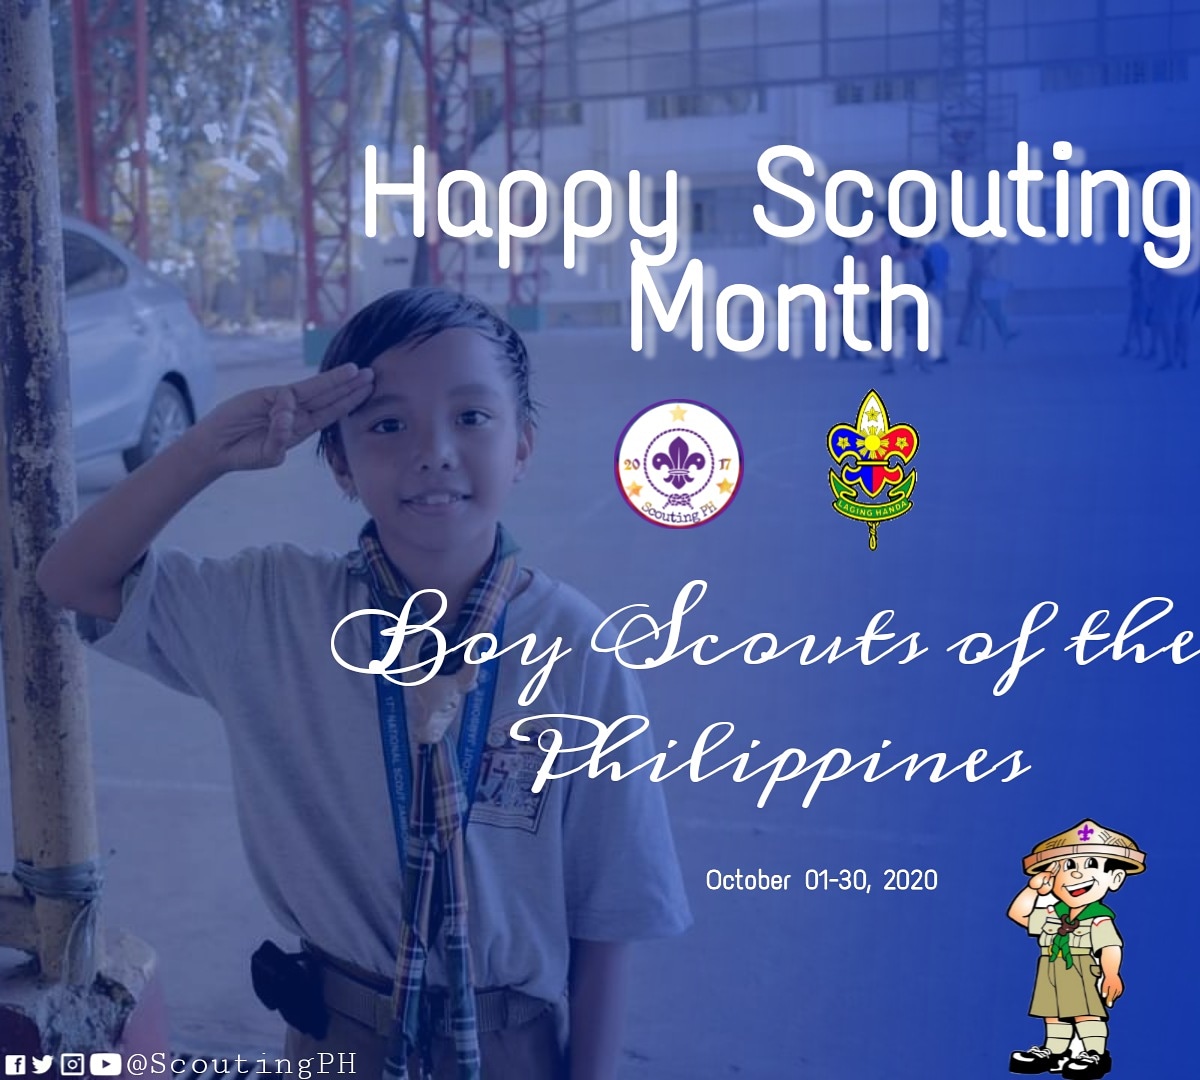 Happy Scouting Month to everyone!

#ScoutsPH #ScoutingMonth #scoutingph